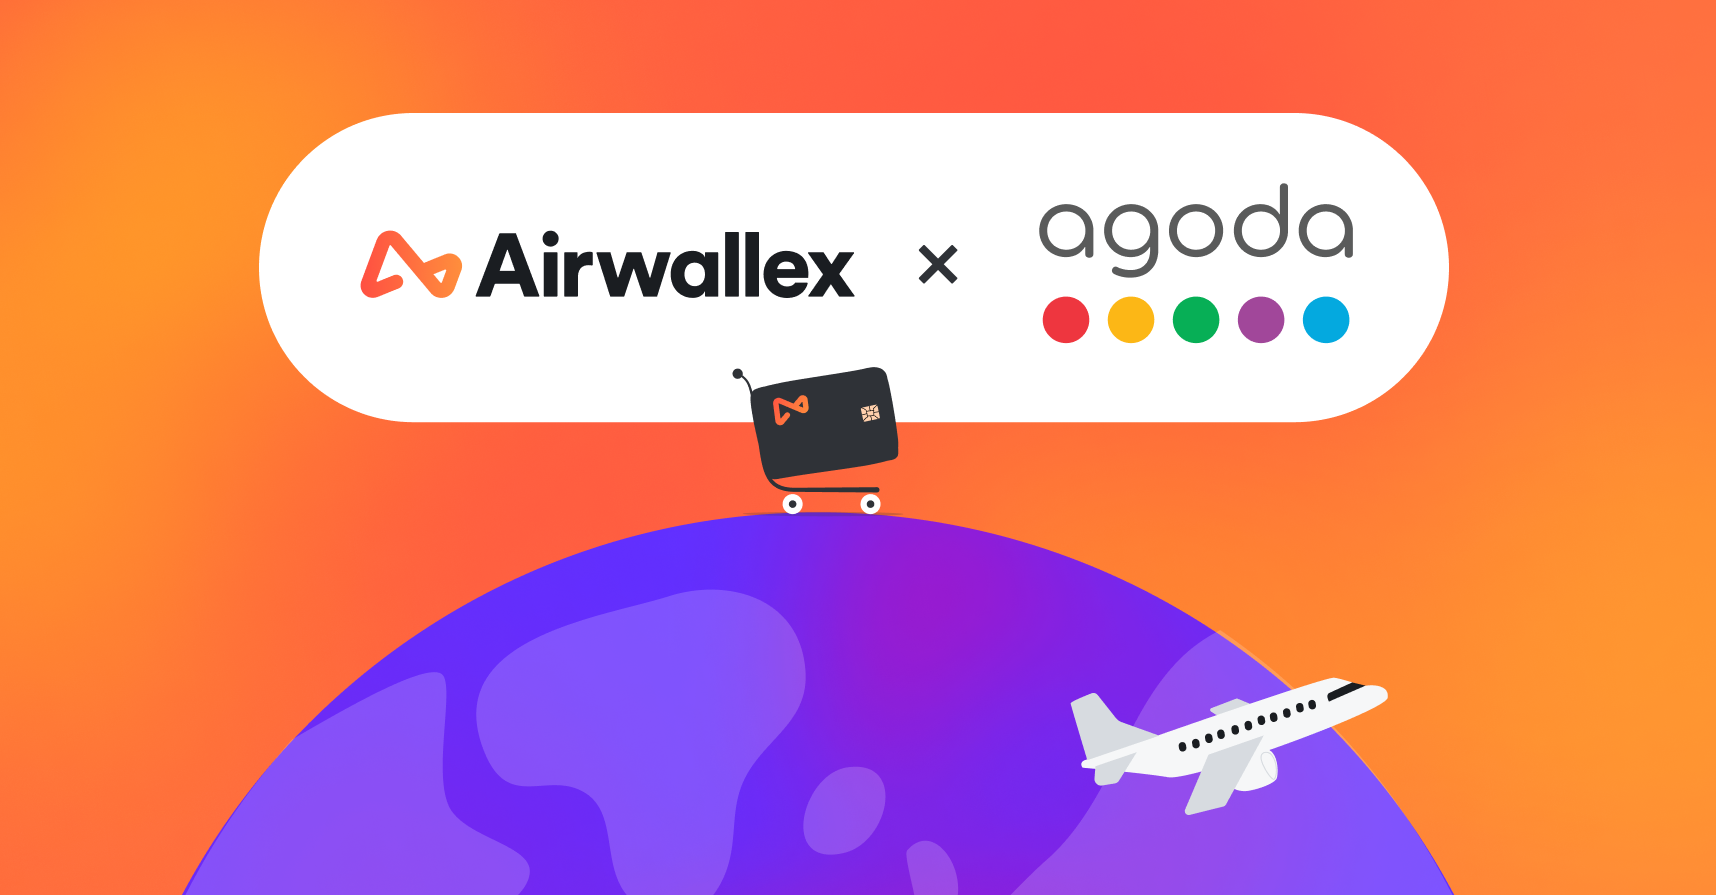 Airwallex partners with Agoda to support Hong Kong business travelers